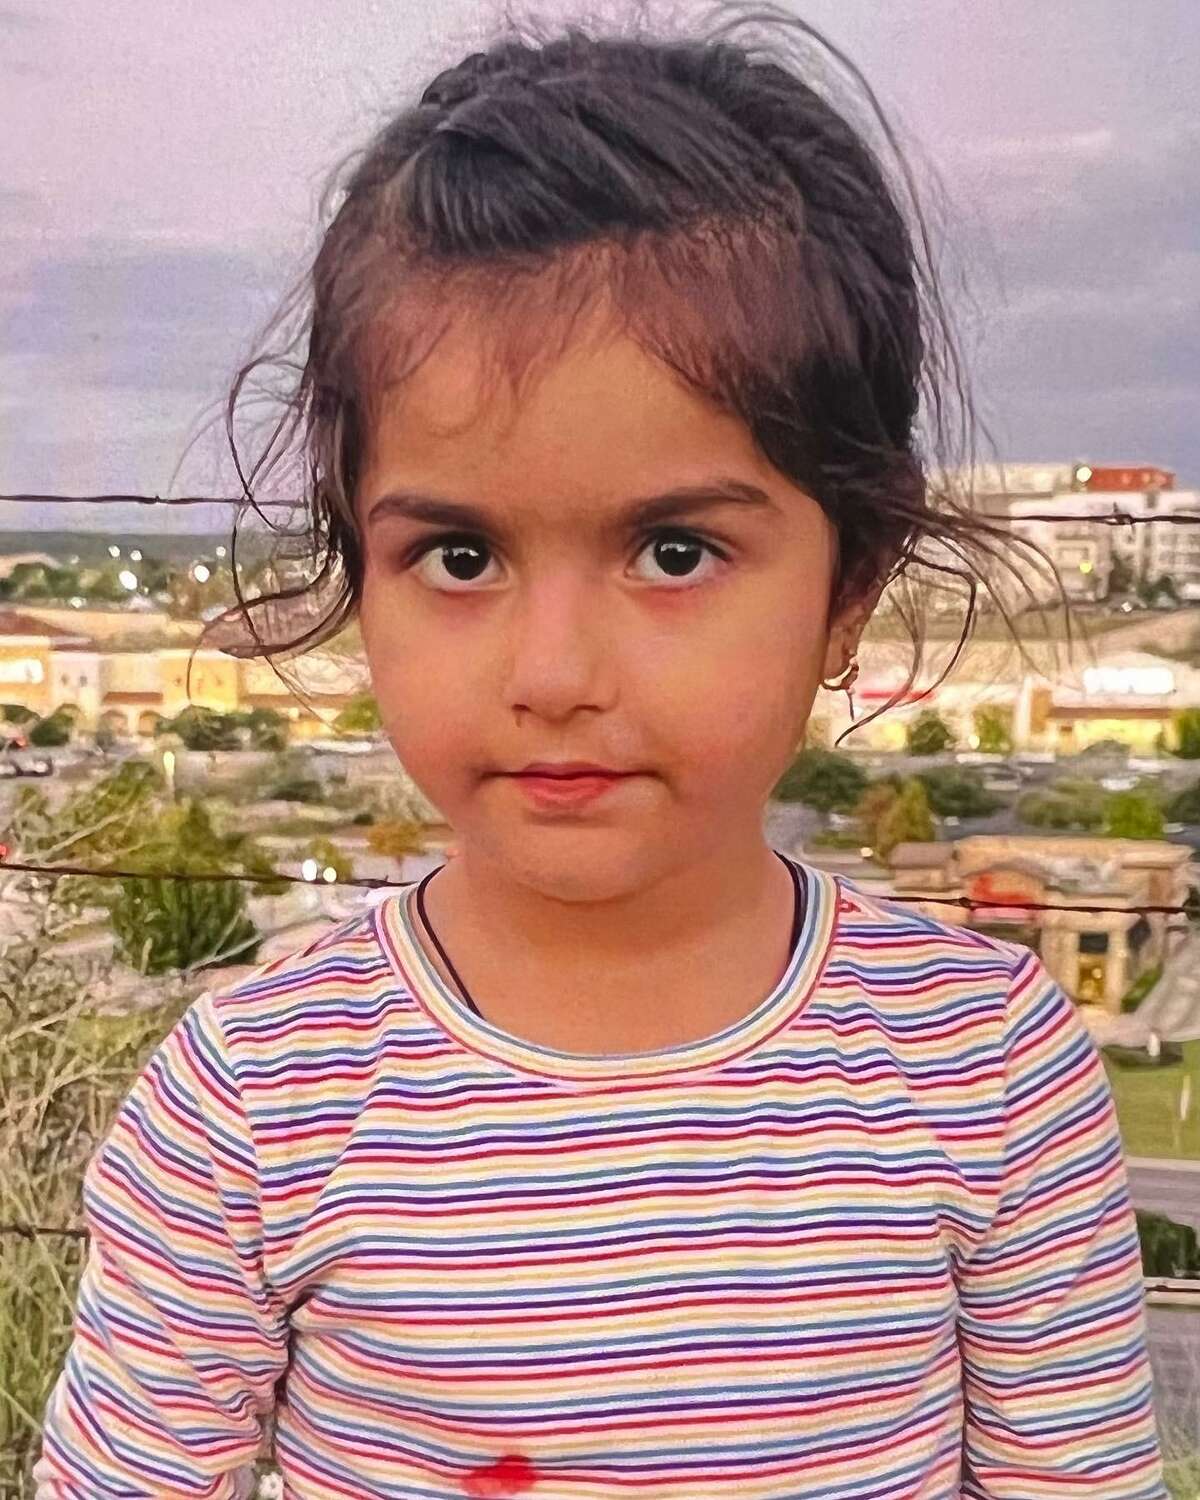 Lina Sardar Khil, 3 years old, has been missing since Monday night.